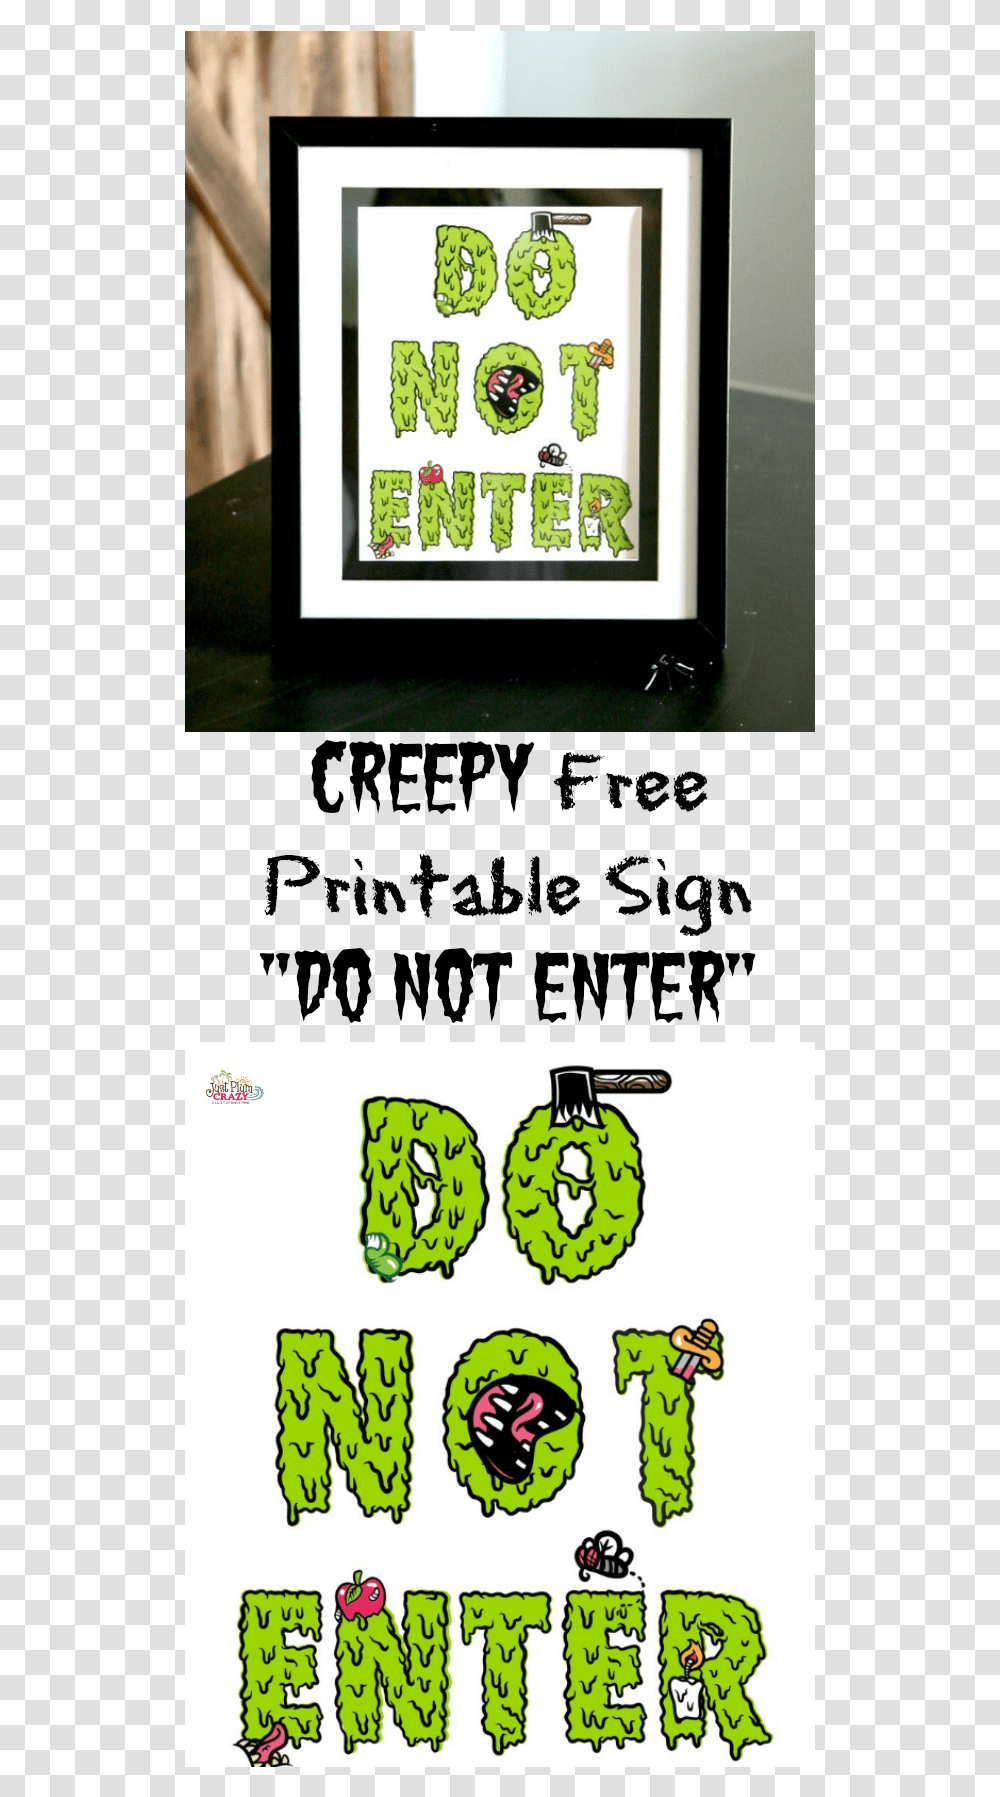 You Can Use The Creepy Free Printable Sign Do Not Enter Printable Do Not Enter Halloween Sign, Grenade, Bomb, Weapon, Weaponry Transparent Png